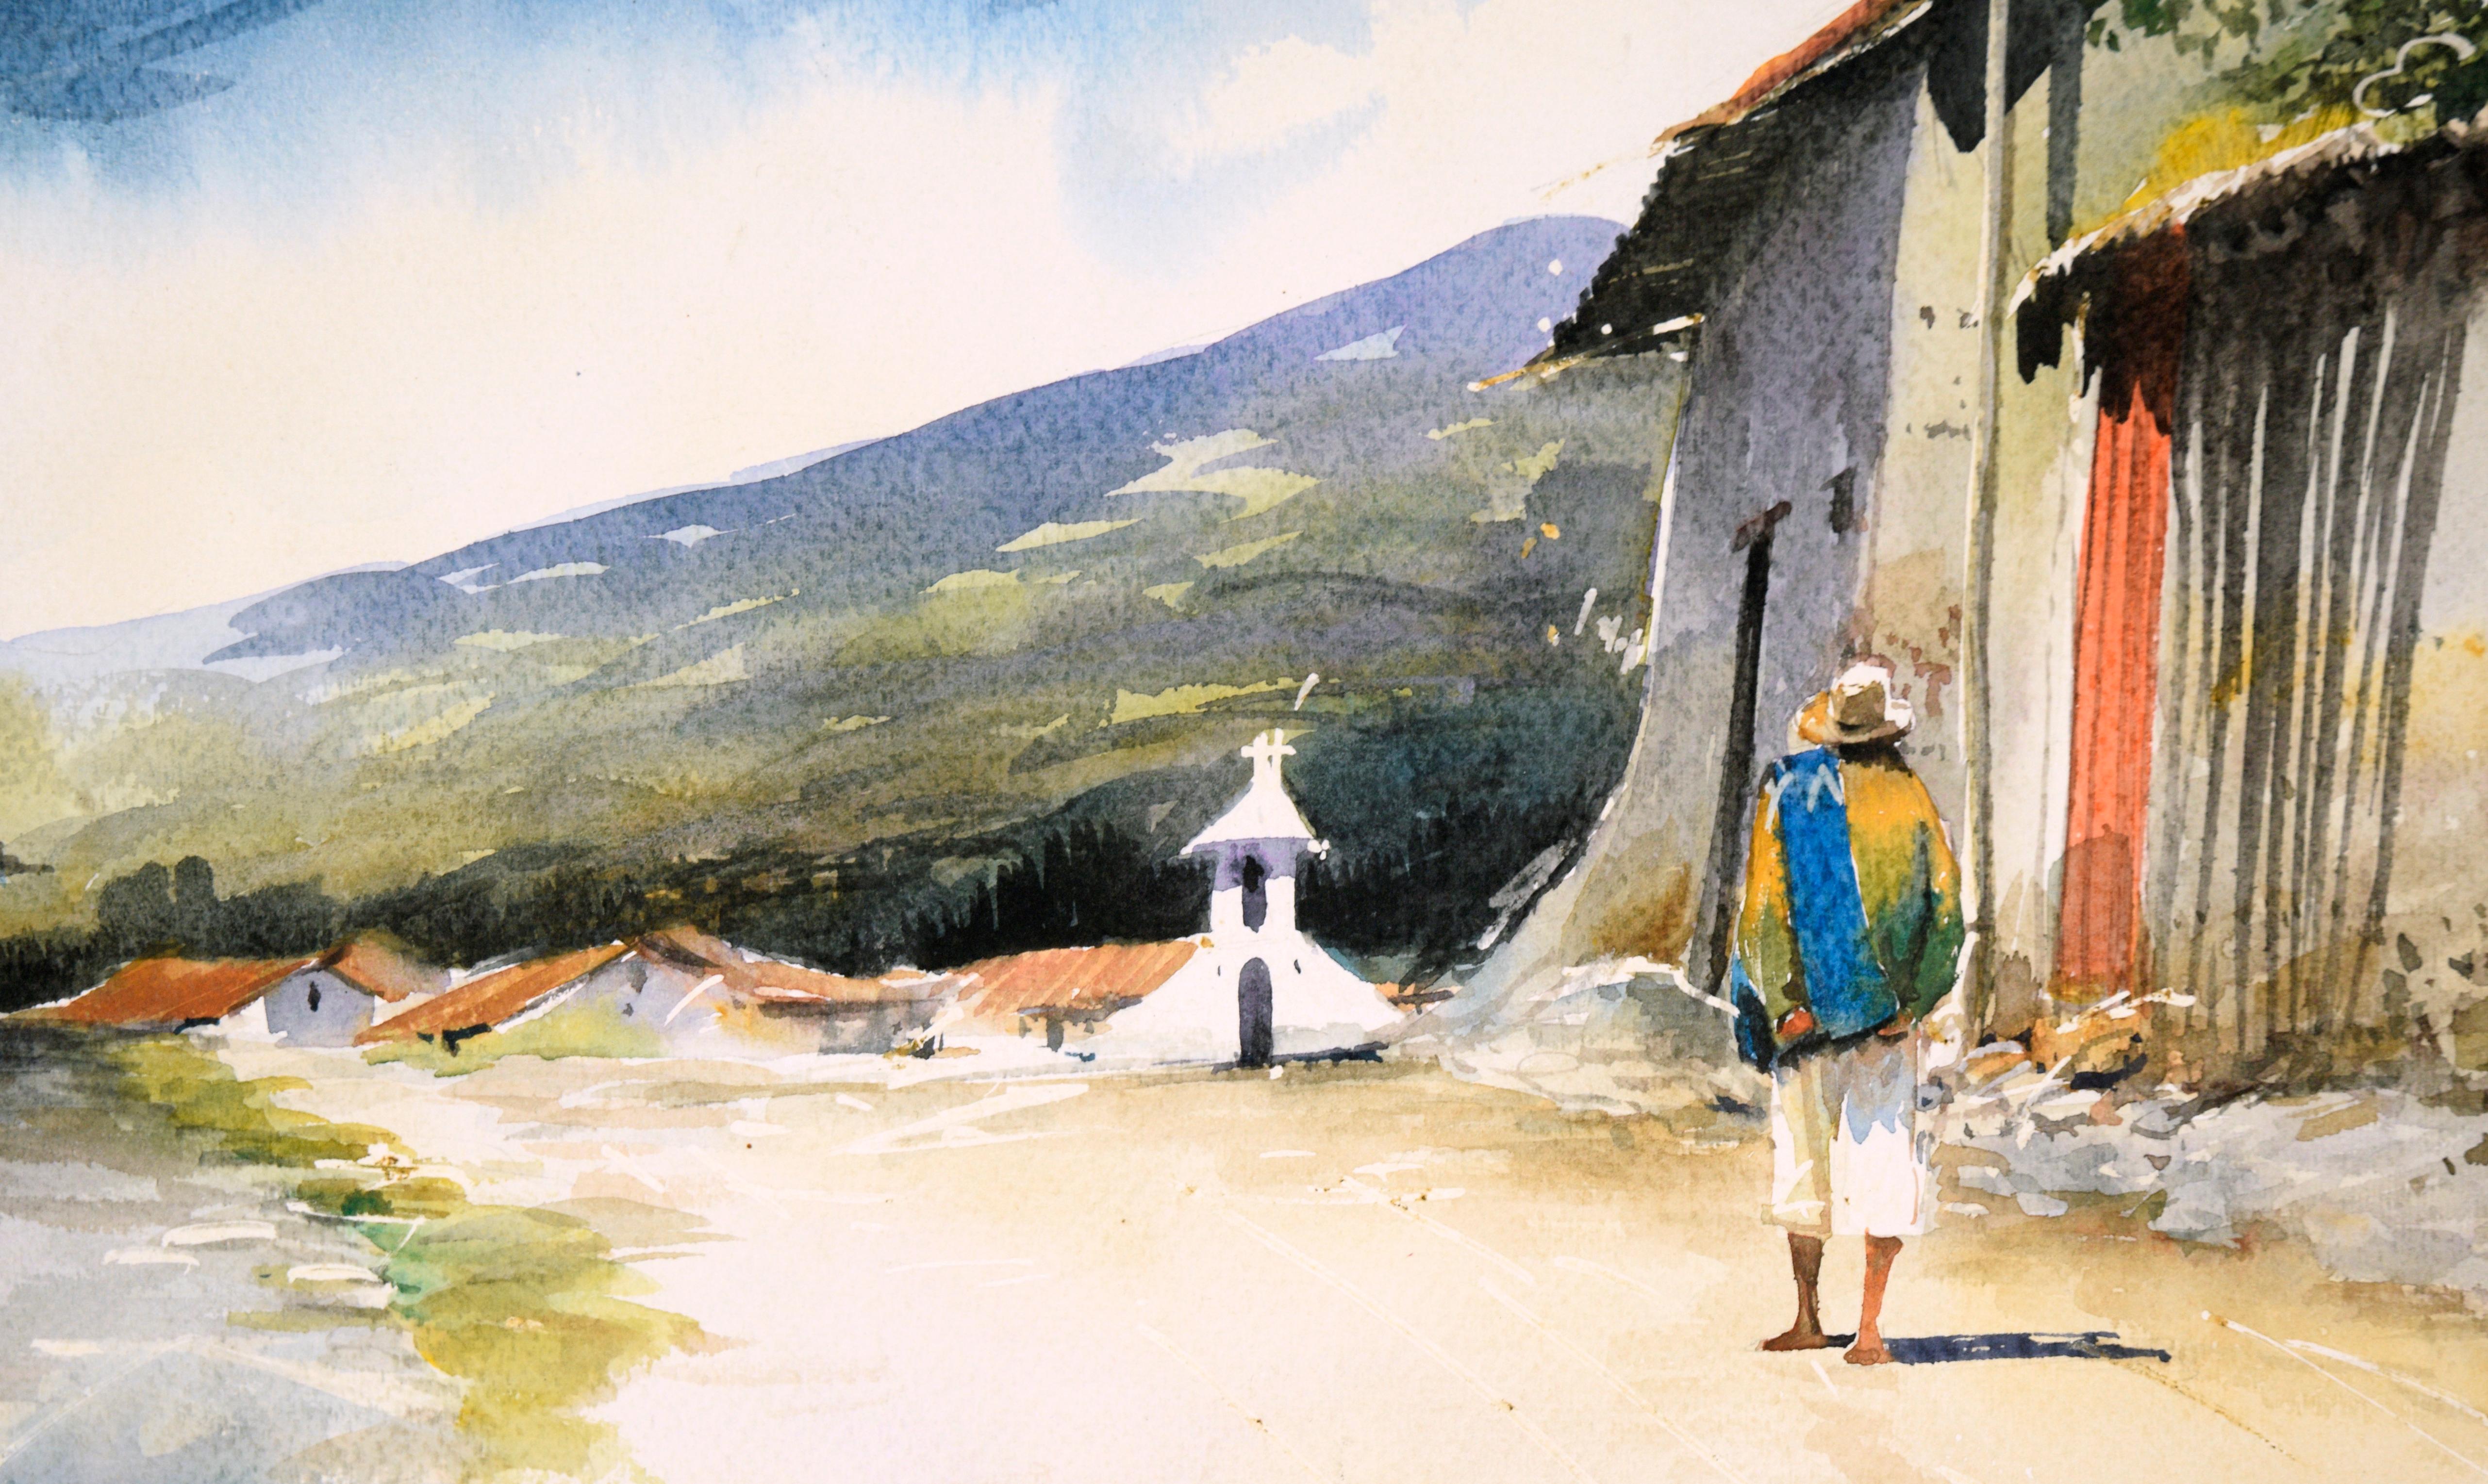 Village at the Base of the Andes Mountains - Watercolor Landscape on Paper - Impressionist Painting by Erazo